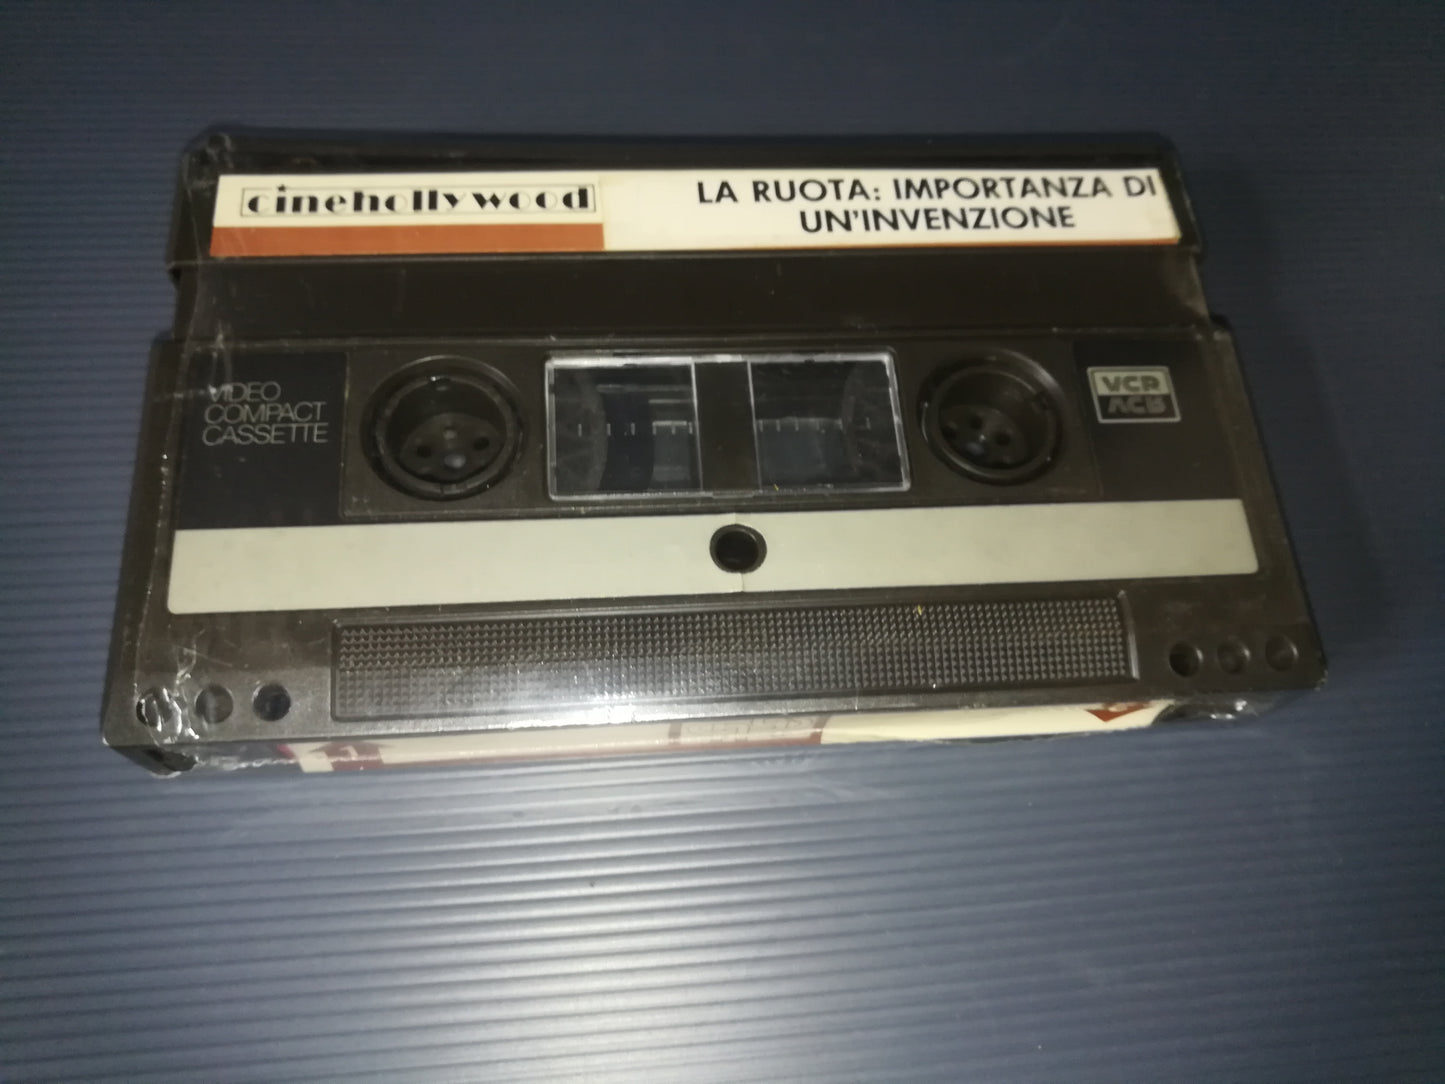 "The Wheel: Importance of an Invention" Video Cassette 2000 Cinehollywood